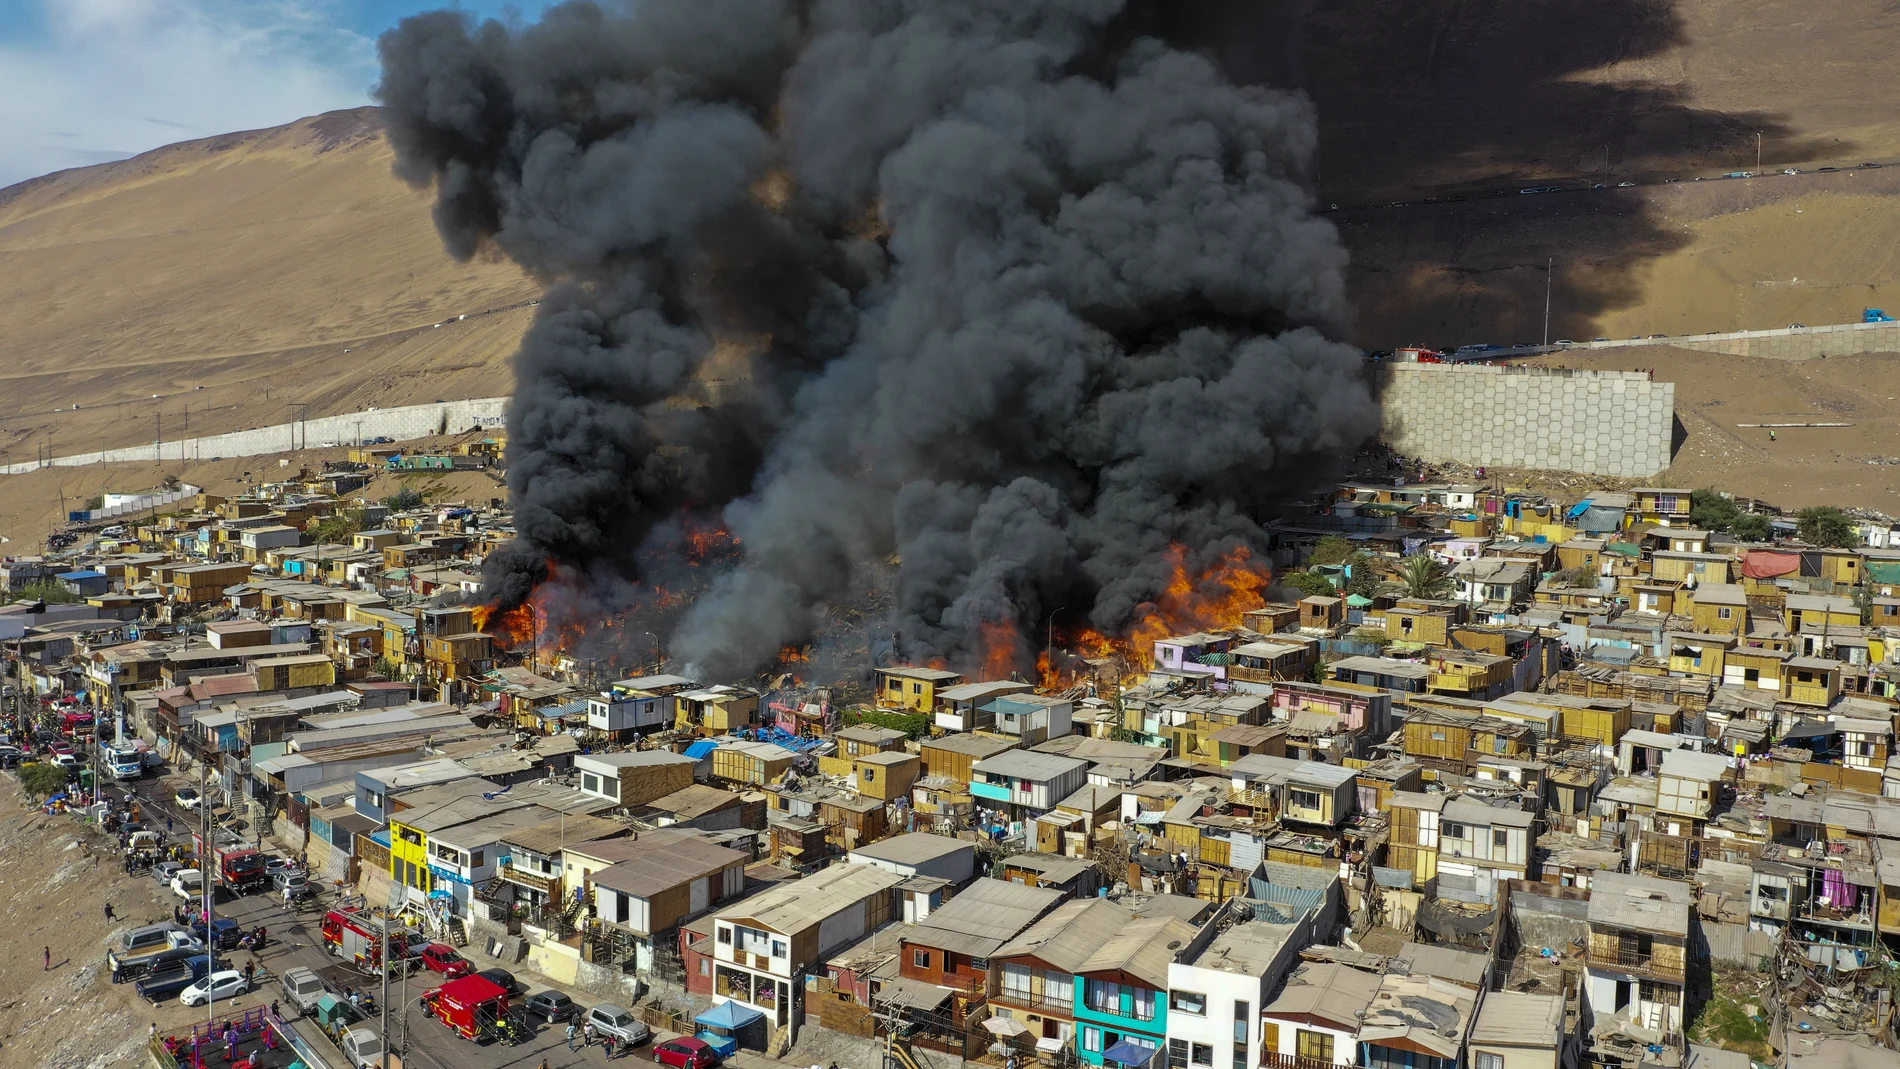 Houses burn during a fire in the low income neighborhood of Laguna Verde, in Iquique, Chile, Monday, Jan. 10, 2022. According to authorities the fire destroyed close to 100 homes of the neighborhood which is populated mostly by migrants. (AP Photo/Ignacio Munoz)